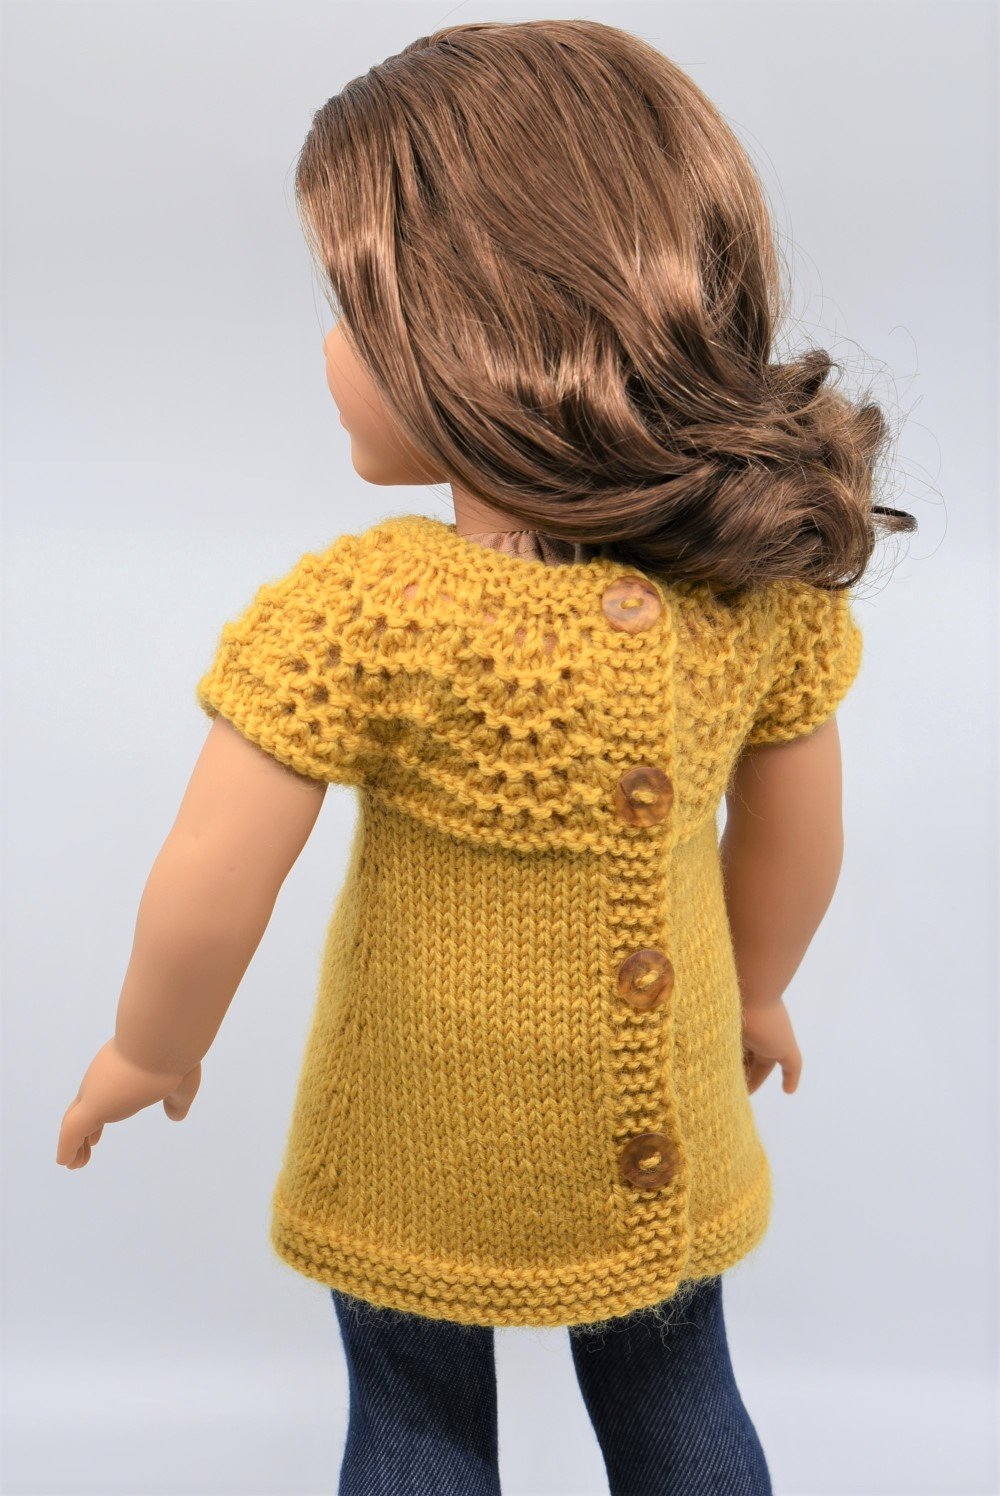 Barbie Doll, Garter Stitch and Tapestry Wool.